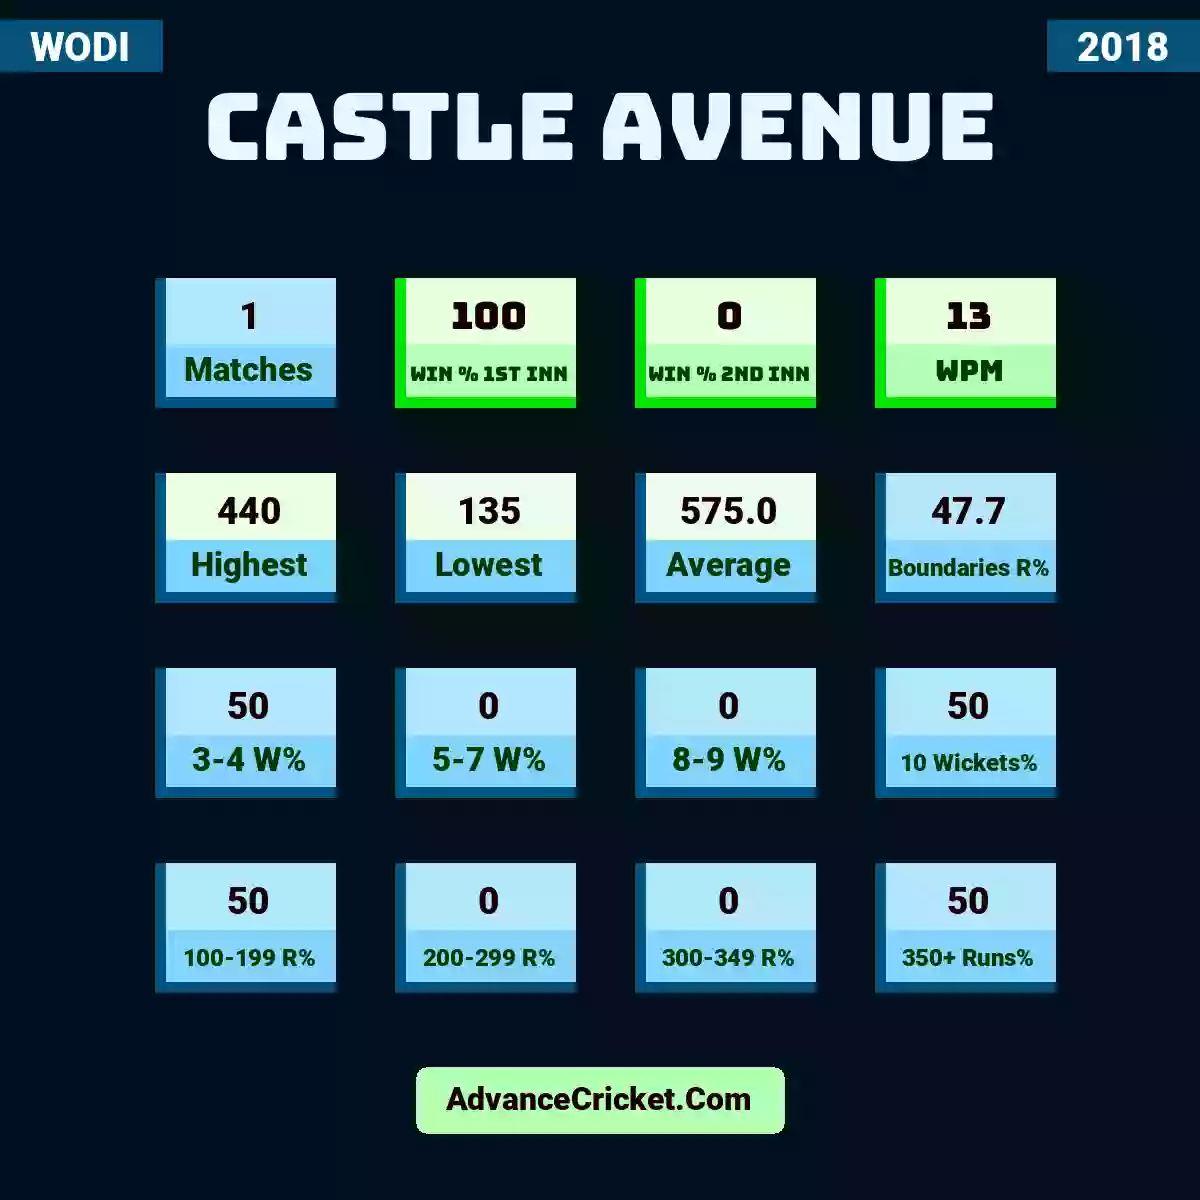 Image showing Castle Avenue with Matches: 1, Win % 1st Inn: 100, Win % 2nd Inn: 0, WPM: 13, Highest: 440, Lowest: 135, Average: 575.0, Boundaries R%: 47.7, 3-4 W%: 50, 5-7 W%: 0, 8-9 W%: 0, 10 Wickets%: 50, 100-199 R%: 50, 200-299 R%: 0, 300-349 R%: 0, 350+ Runs%: 50.